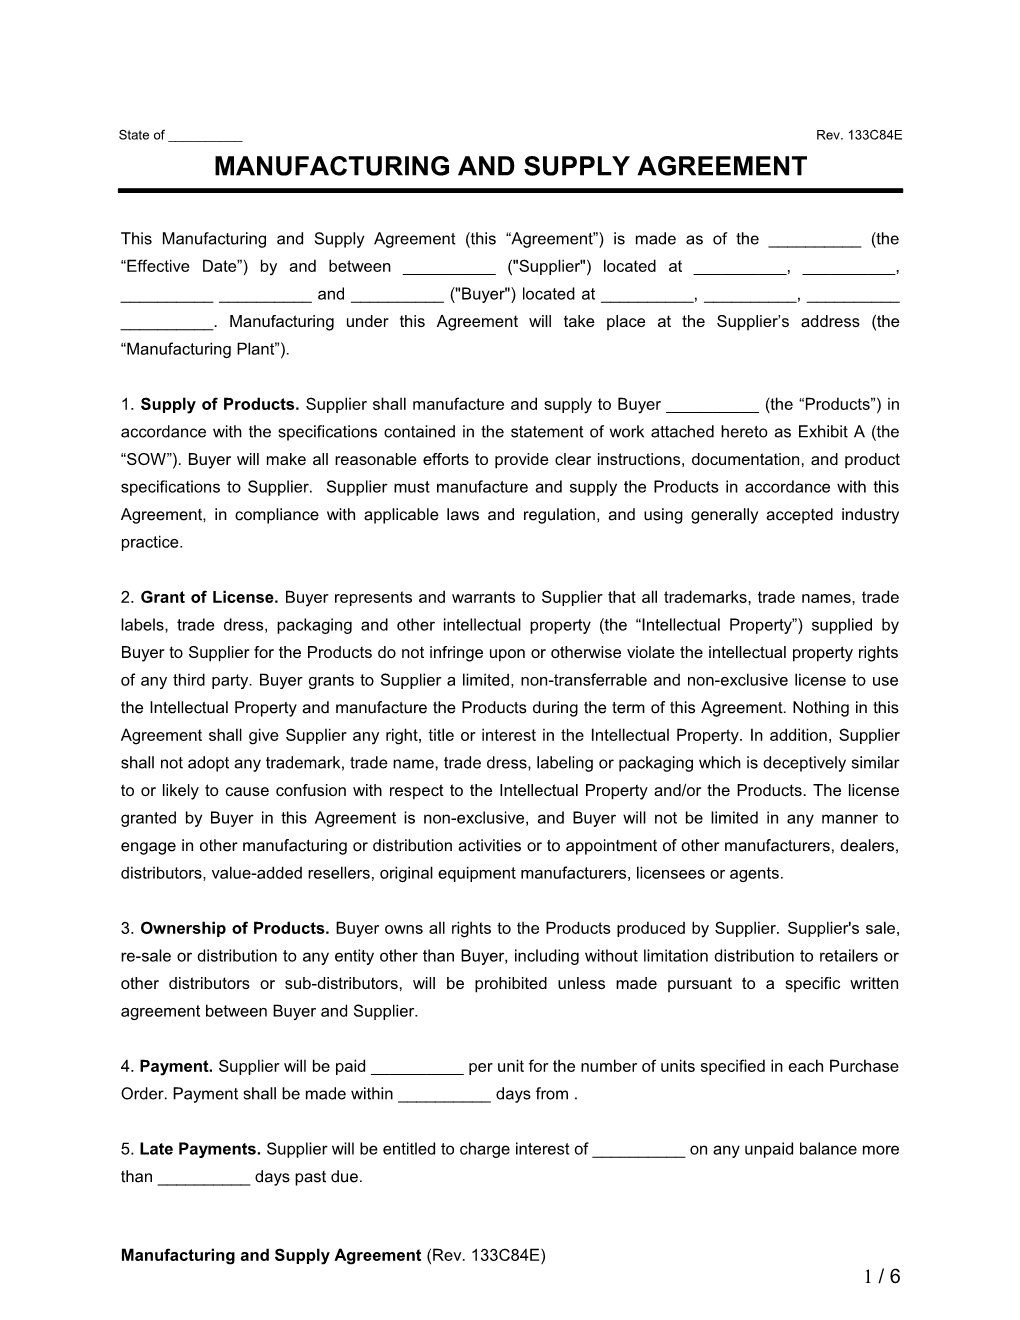 This Manufacturing and Supply Agreement (This Agreement ) Is Made As of the ______(The